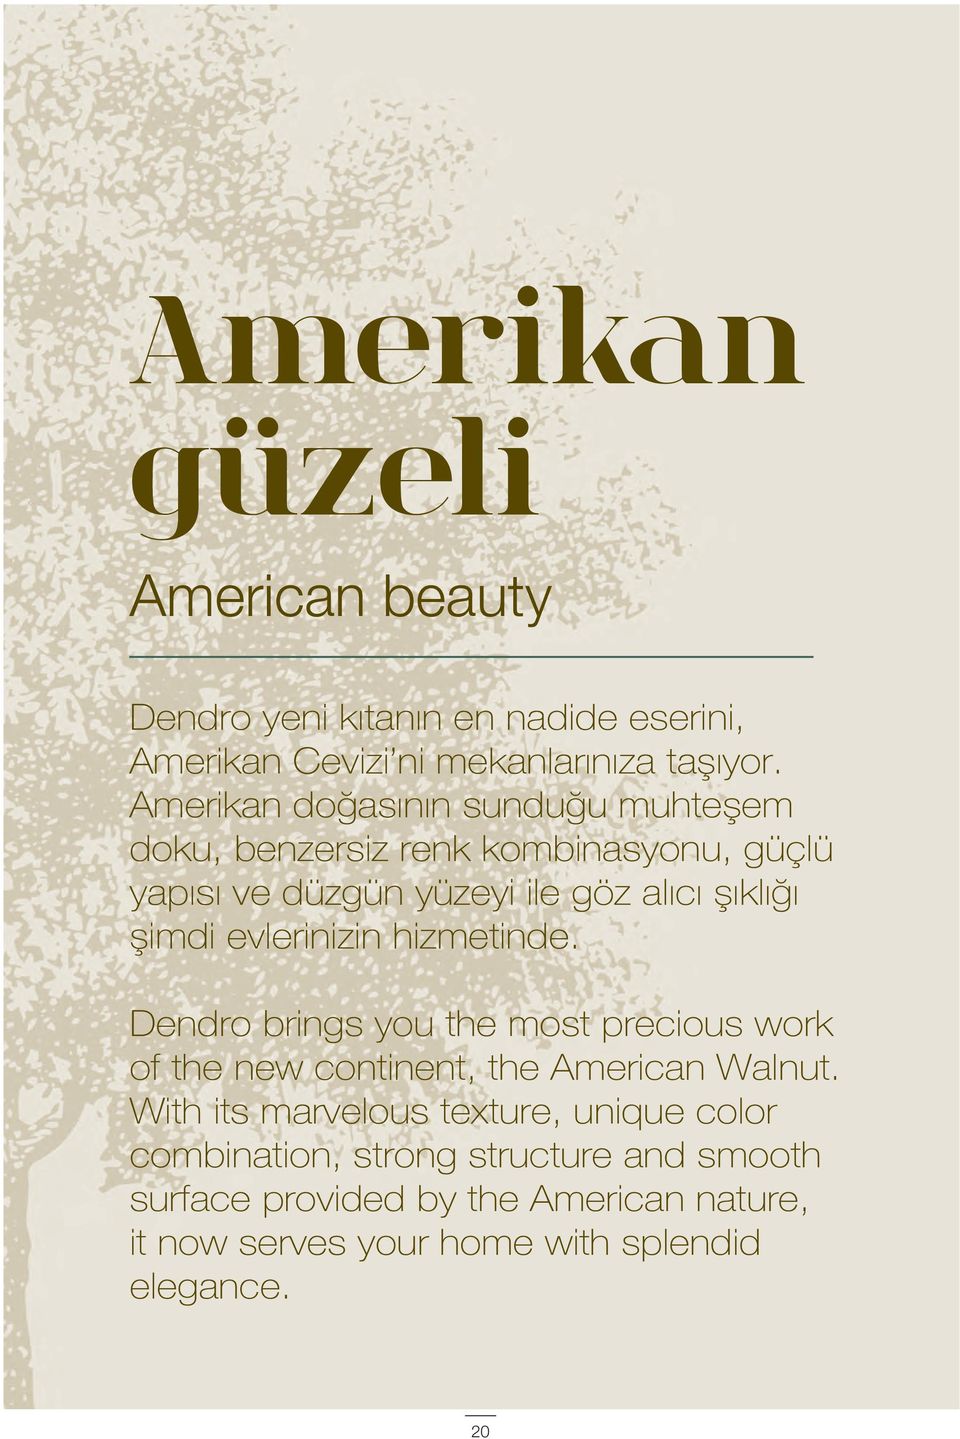 evlerinizin hizmetinde. Dendro brings you the most precious work of the new continent, the American Walnut.